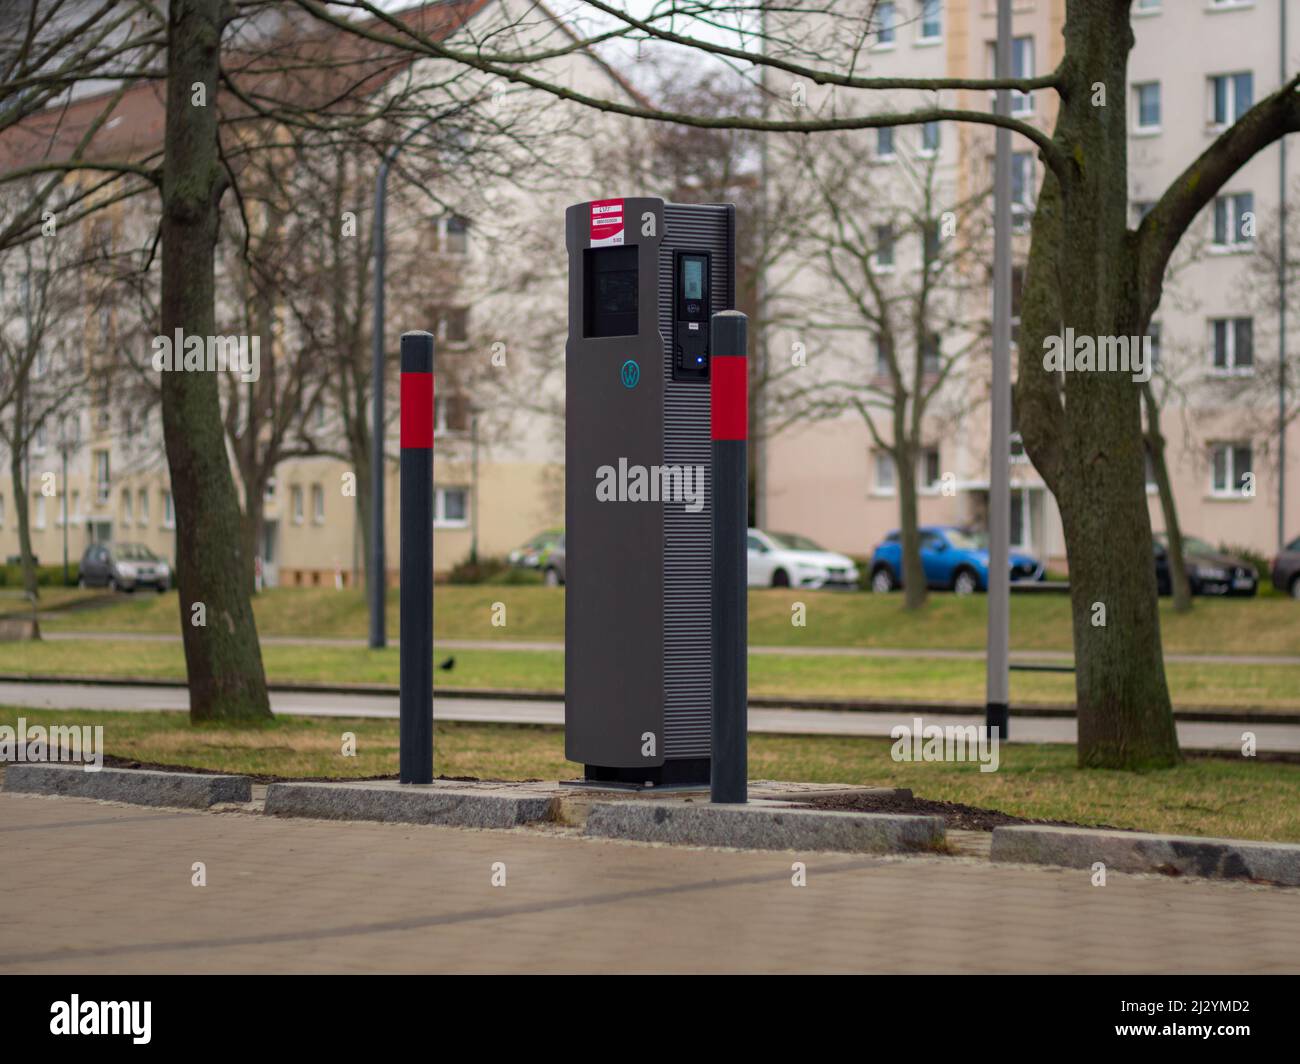 Charging station for an electric car on a parking lot. Empty space to park and charge an electric vehicle. New device in the city for zero emission. Stock Photo